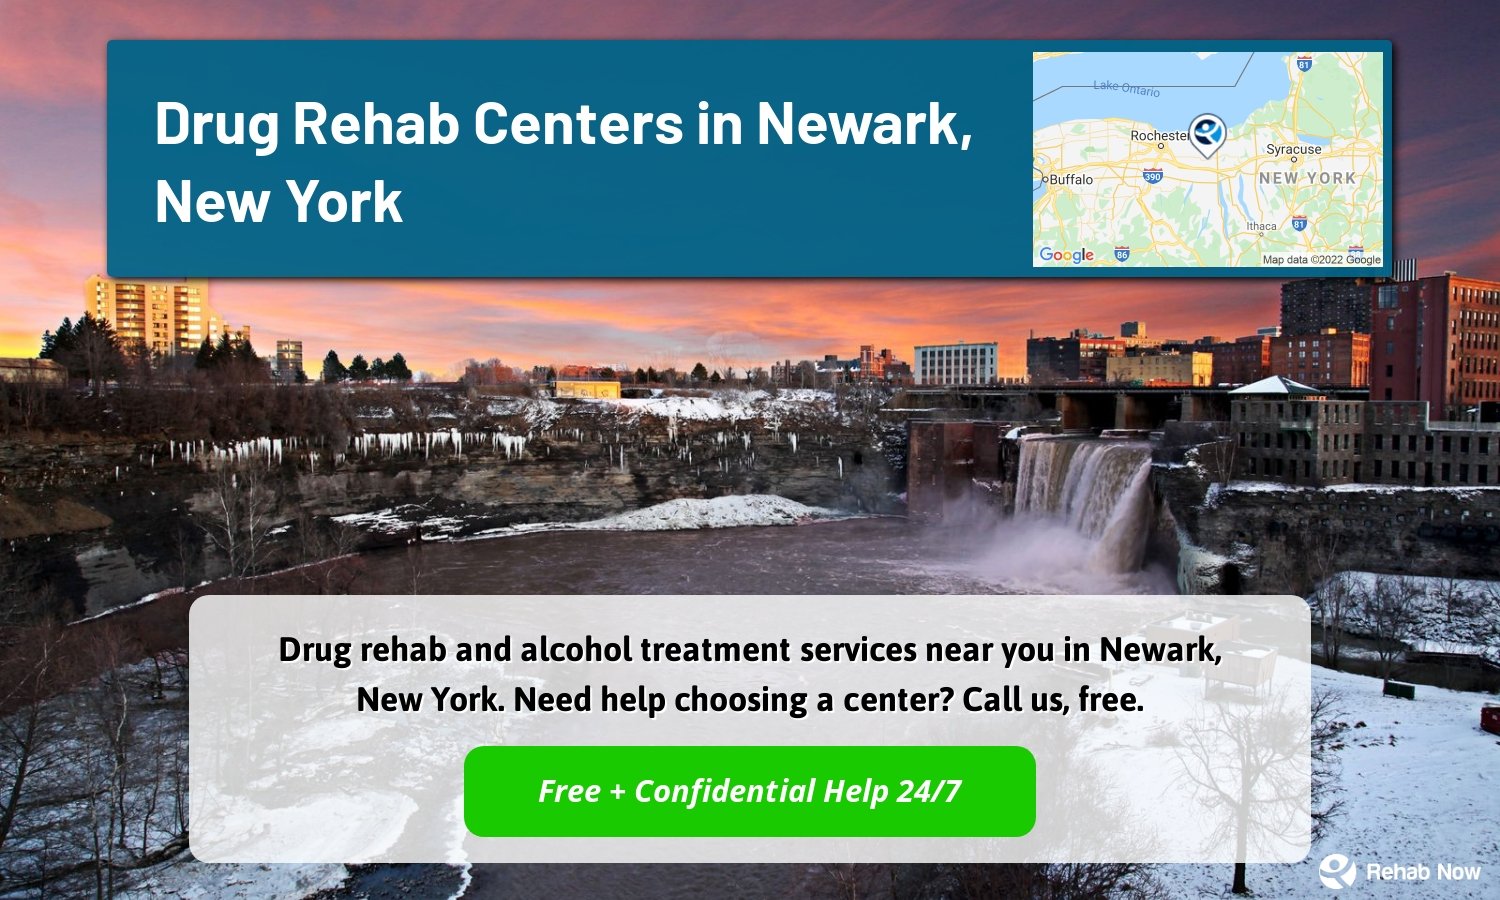 Drug rehab and alcohol treatment services near you in Newark, New York. Need help choosing a center? Call us, free.